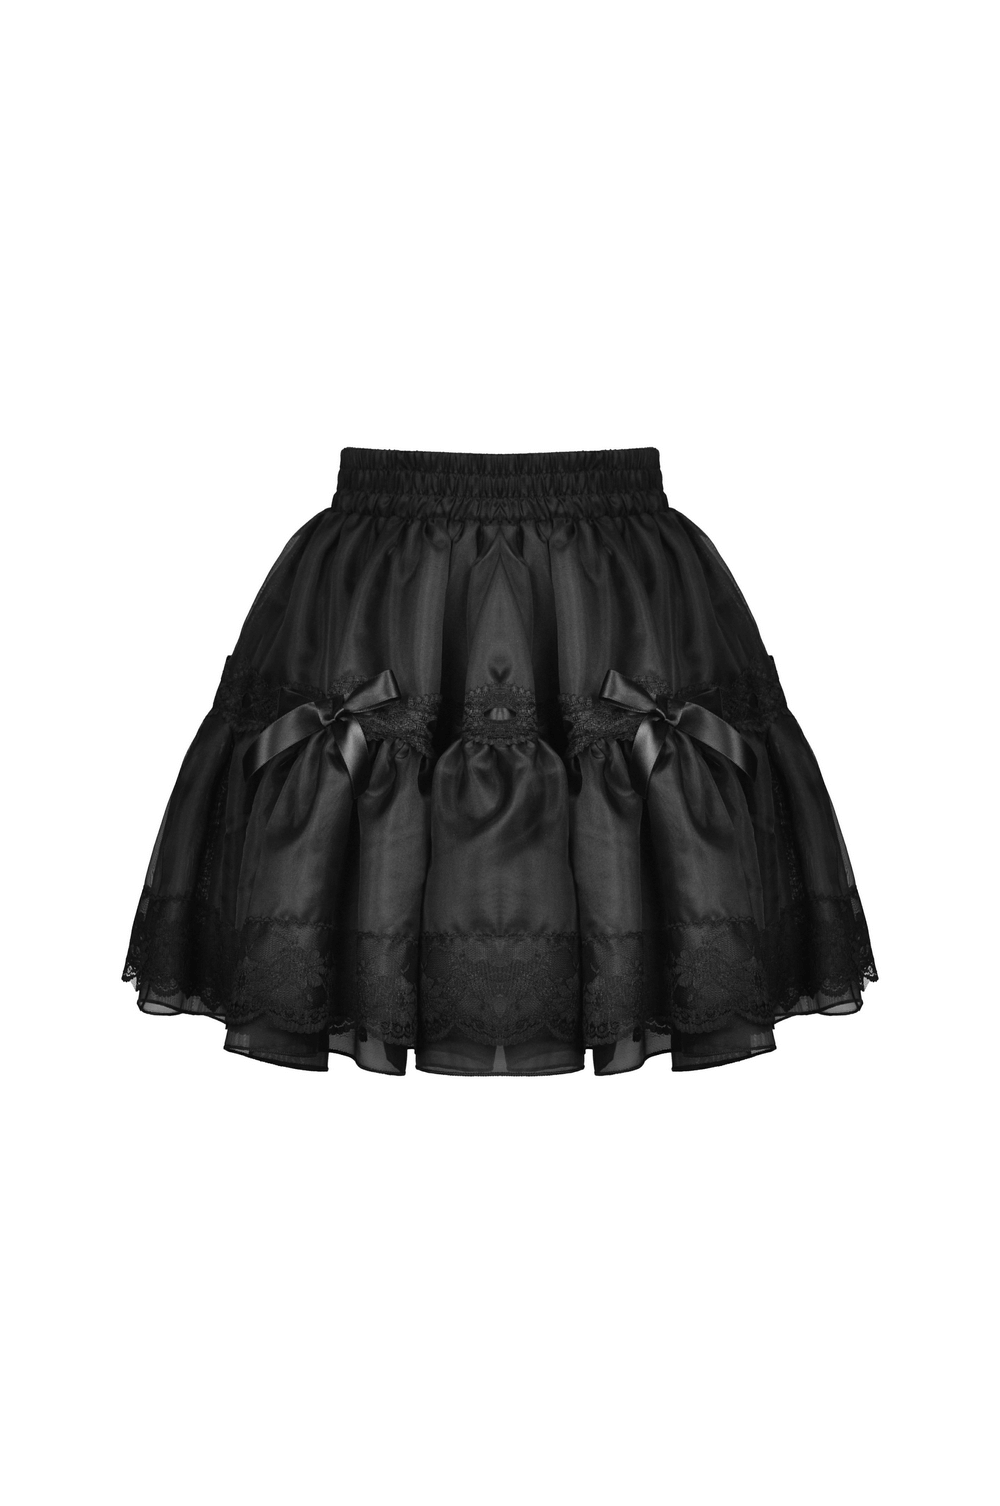 Elegant Black Lace Skirt with Bow Details for Evening Wear